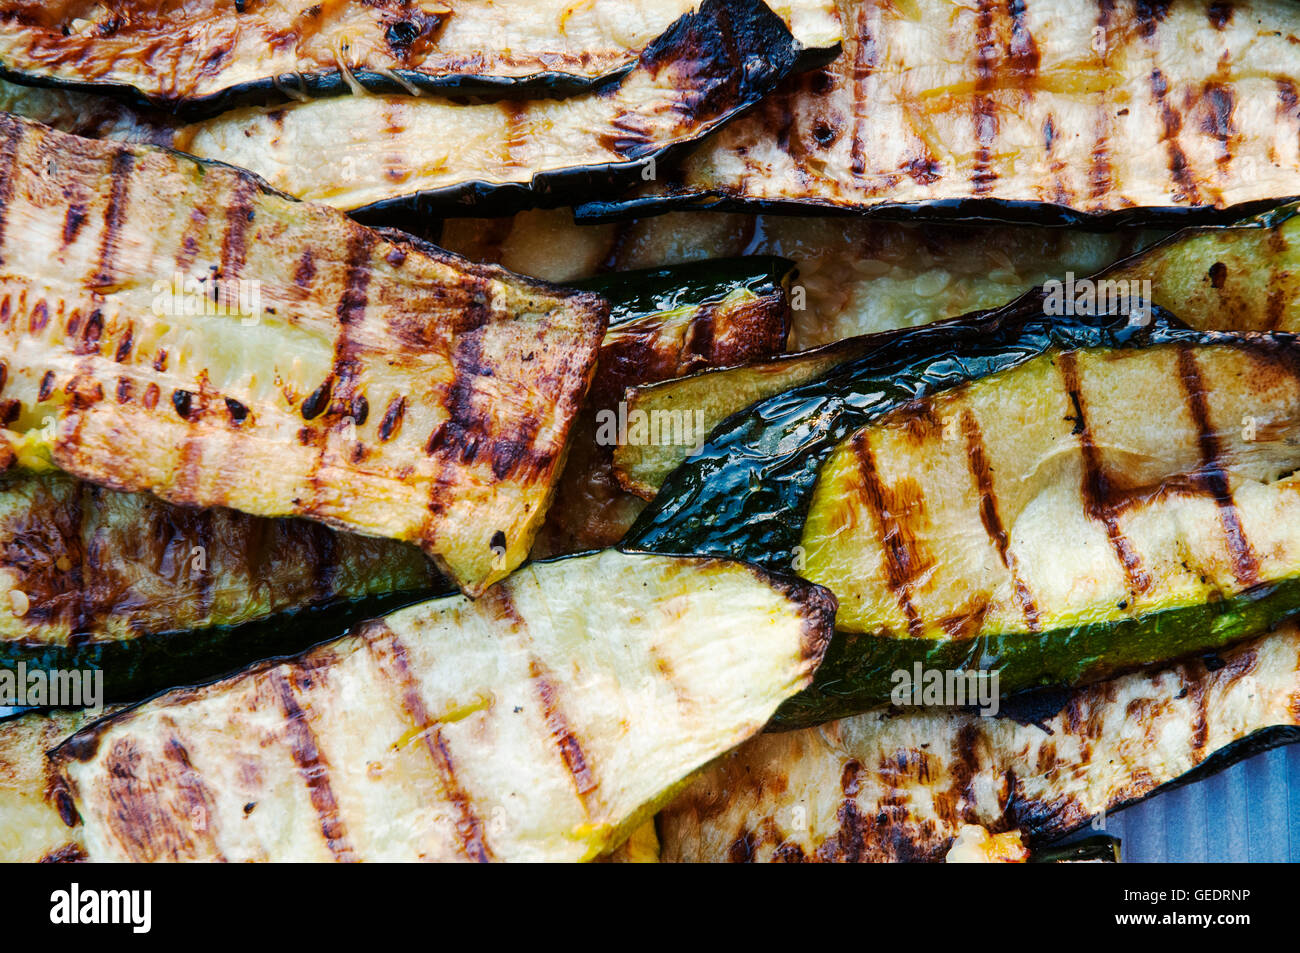 Grilled Zucchini, Close-Up Stock Photo